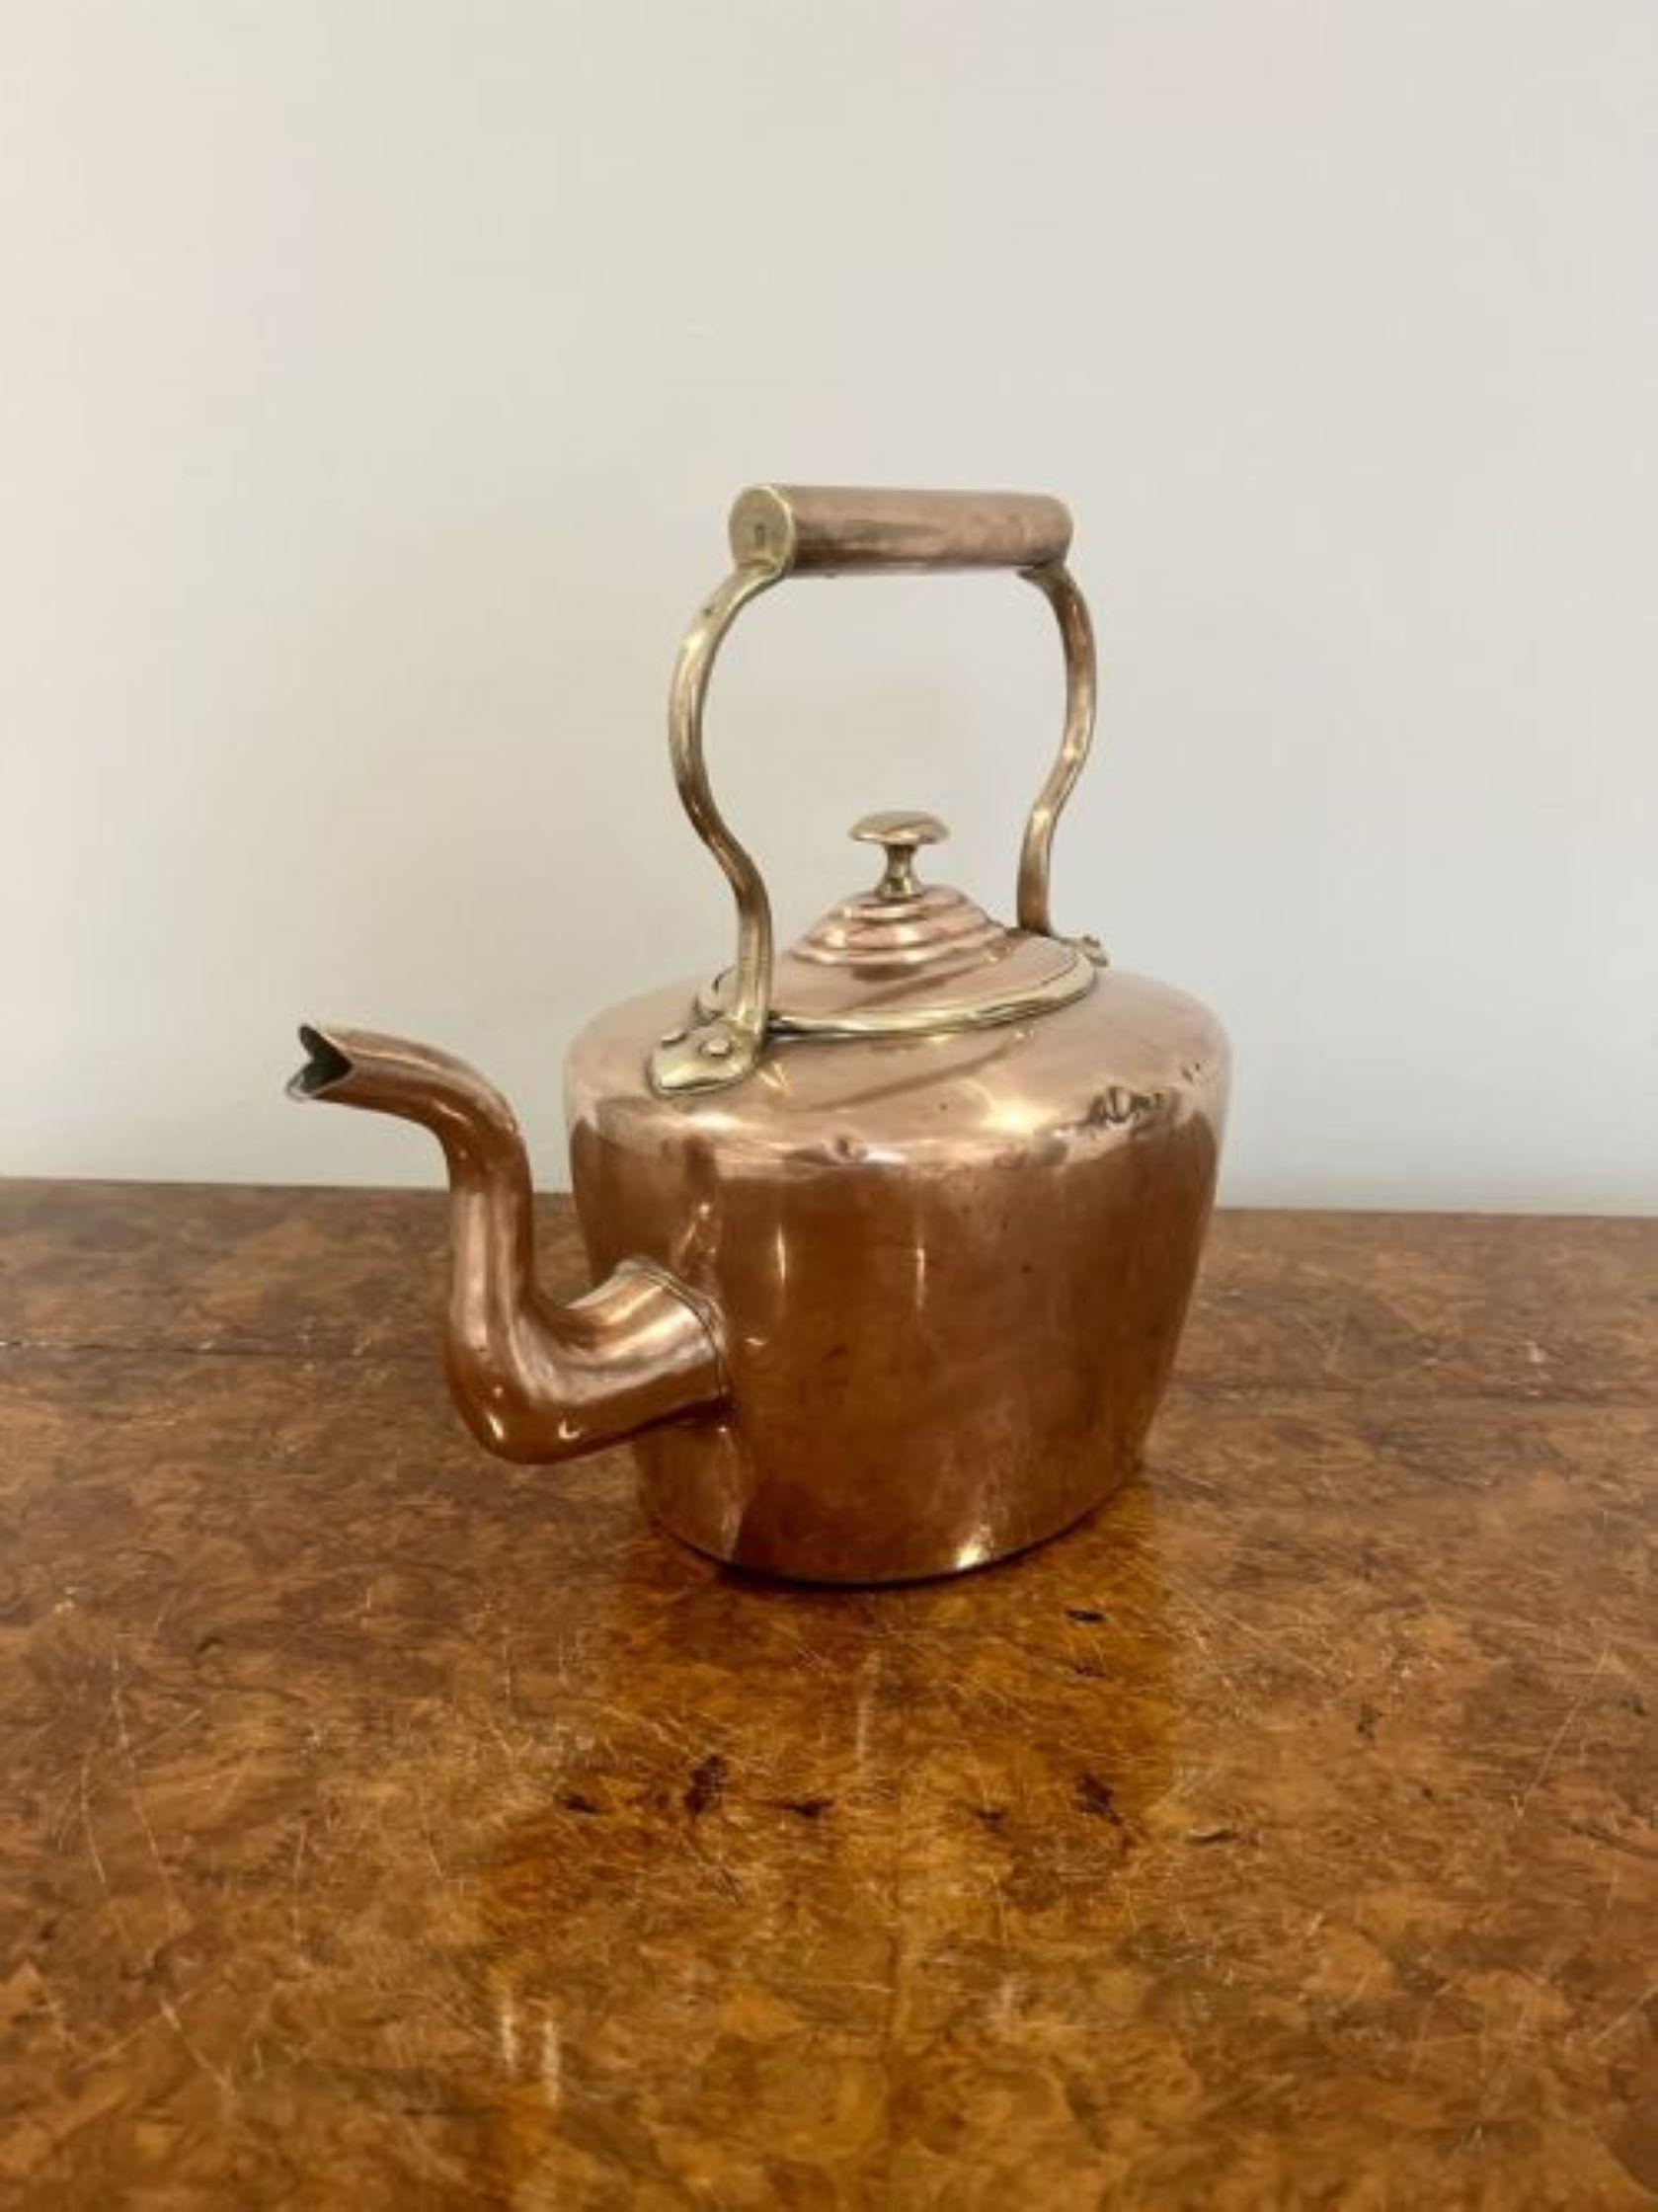 Small antique George III quality copper kettle having a quality copper kettle with a removable lid with the original brass knob having a shaped handle and spout